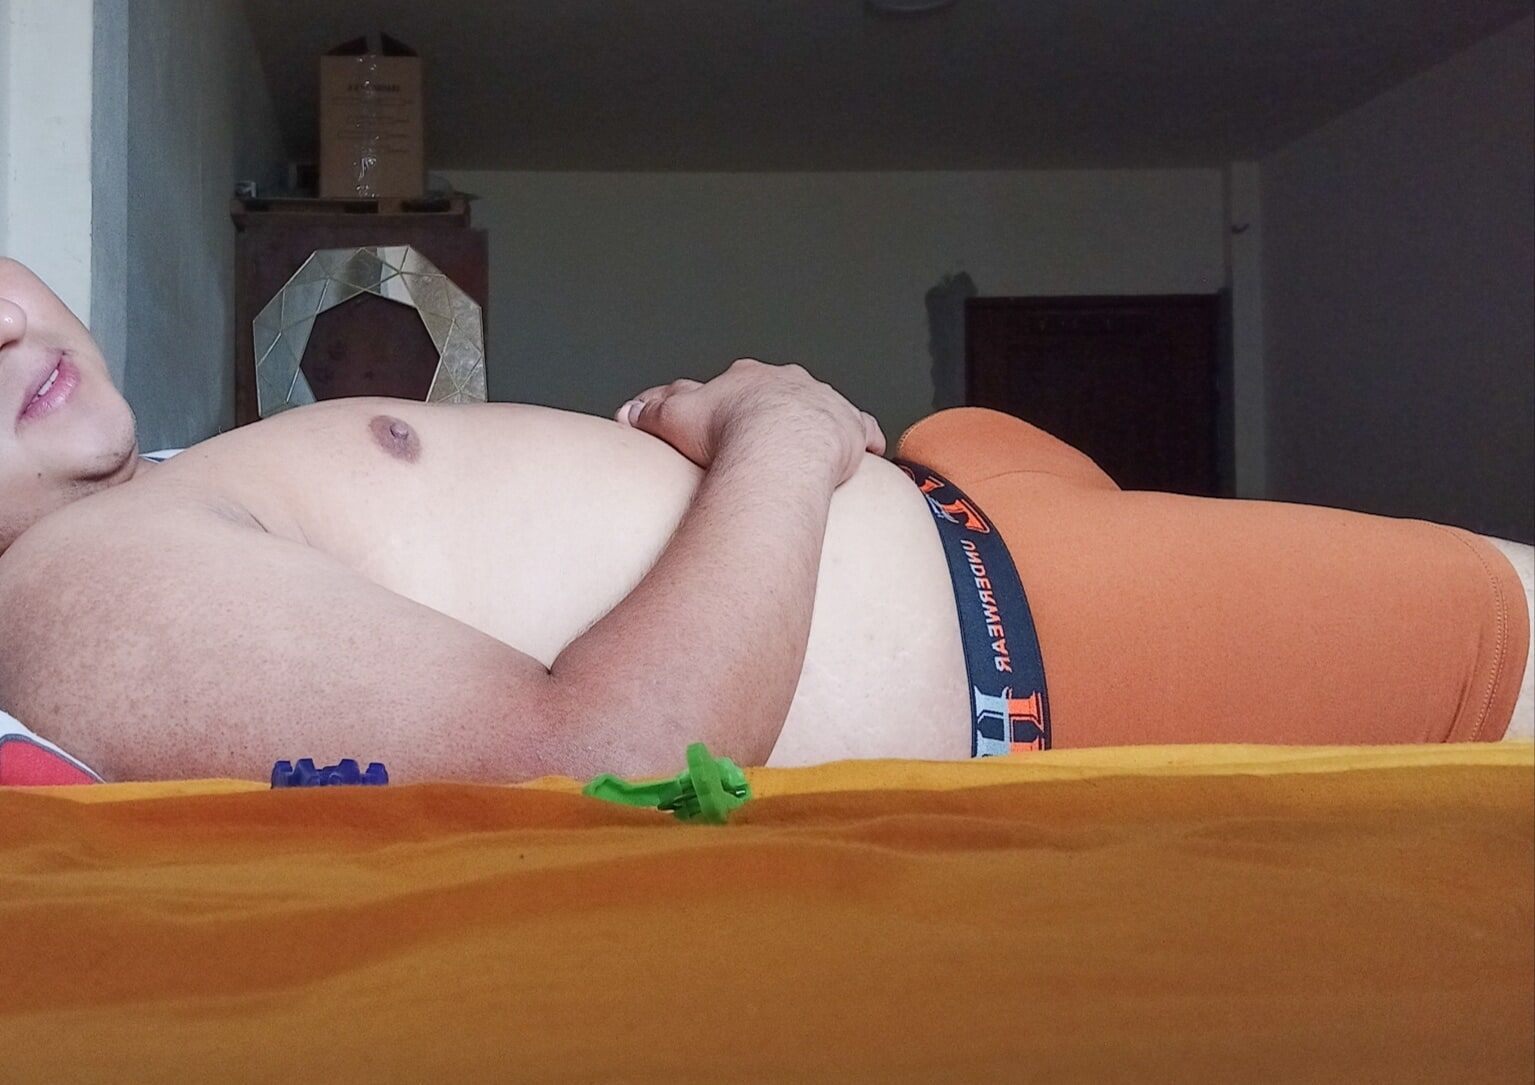 Me Lying Down and my Penis Standing - 01 (In Underwear) #15